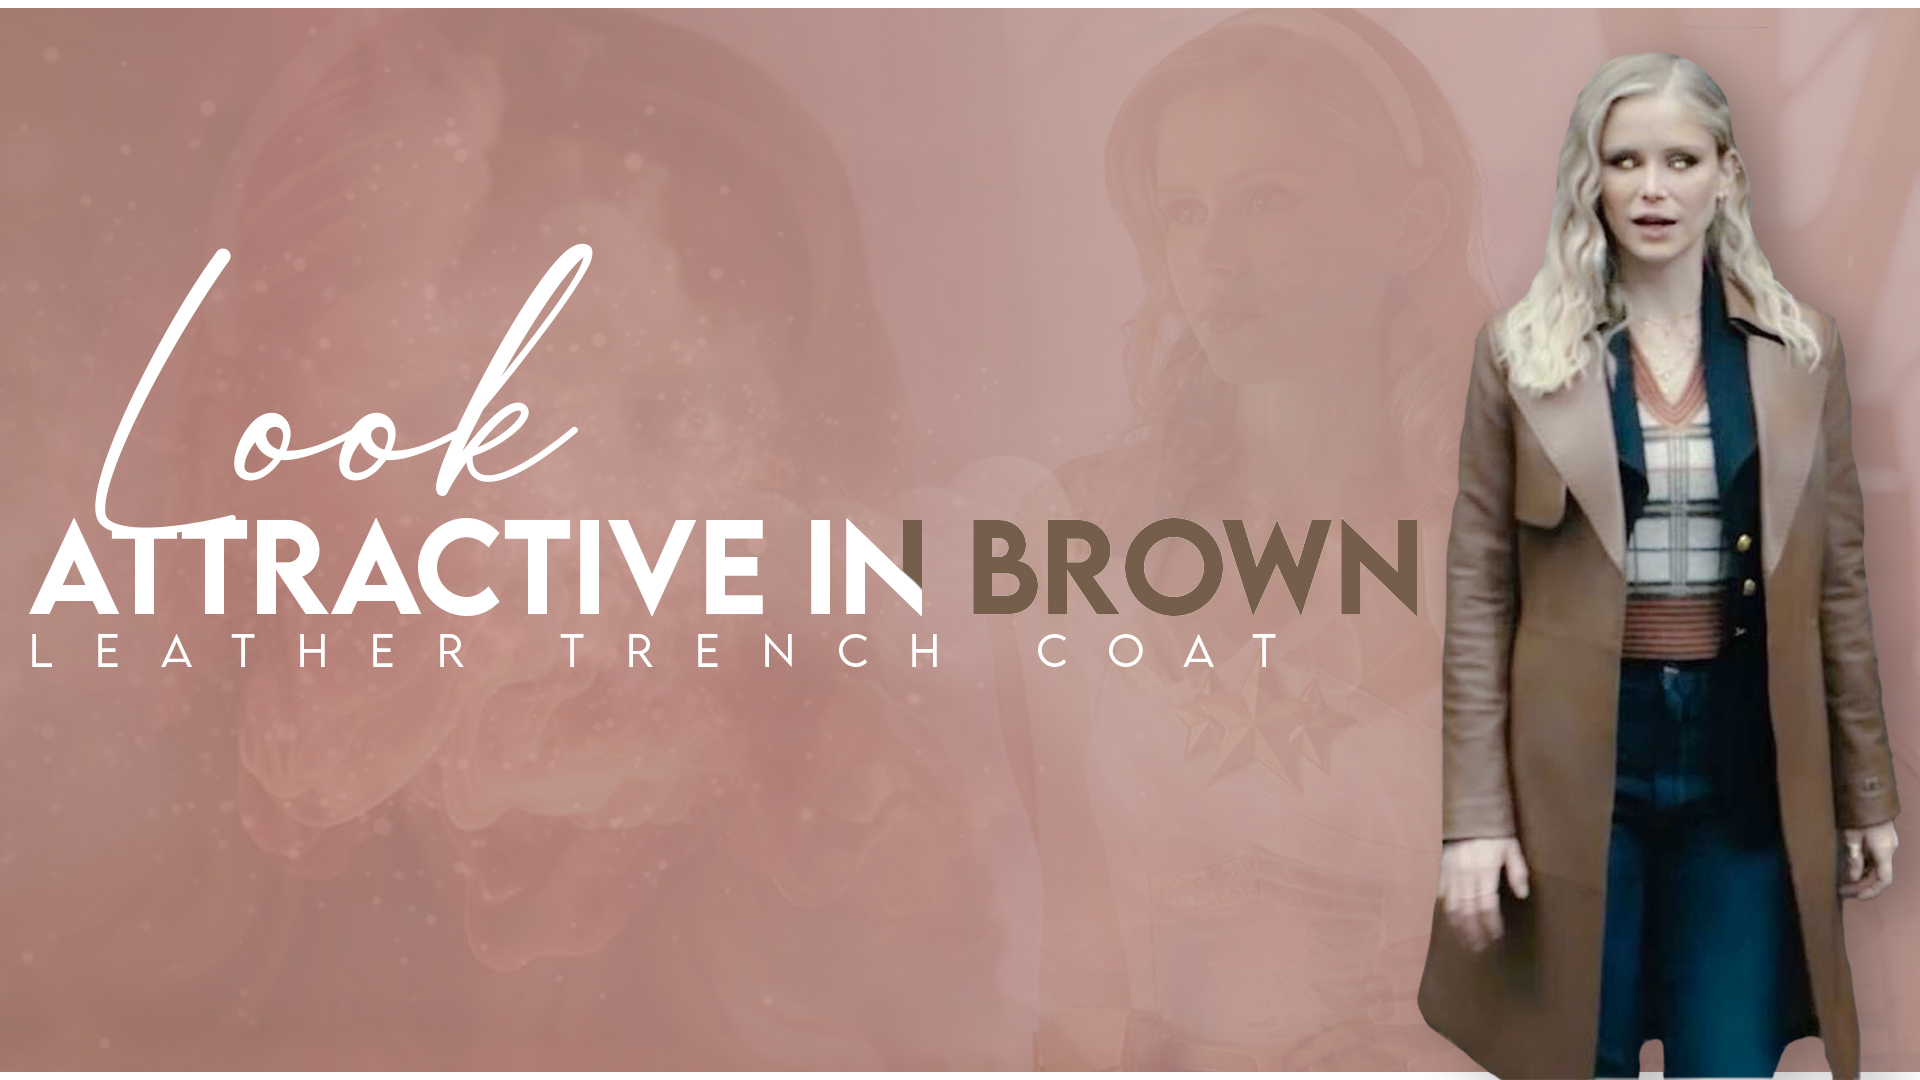 Look Attractive In Brown Leather Trench Coat